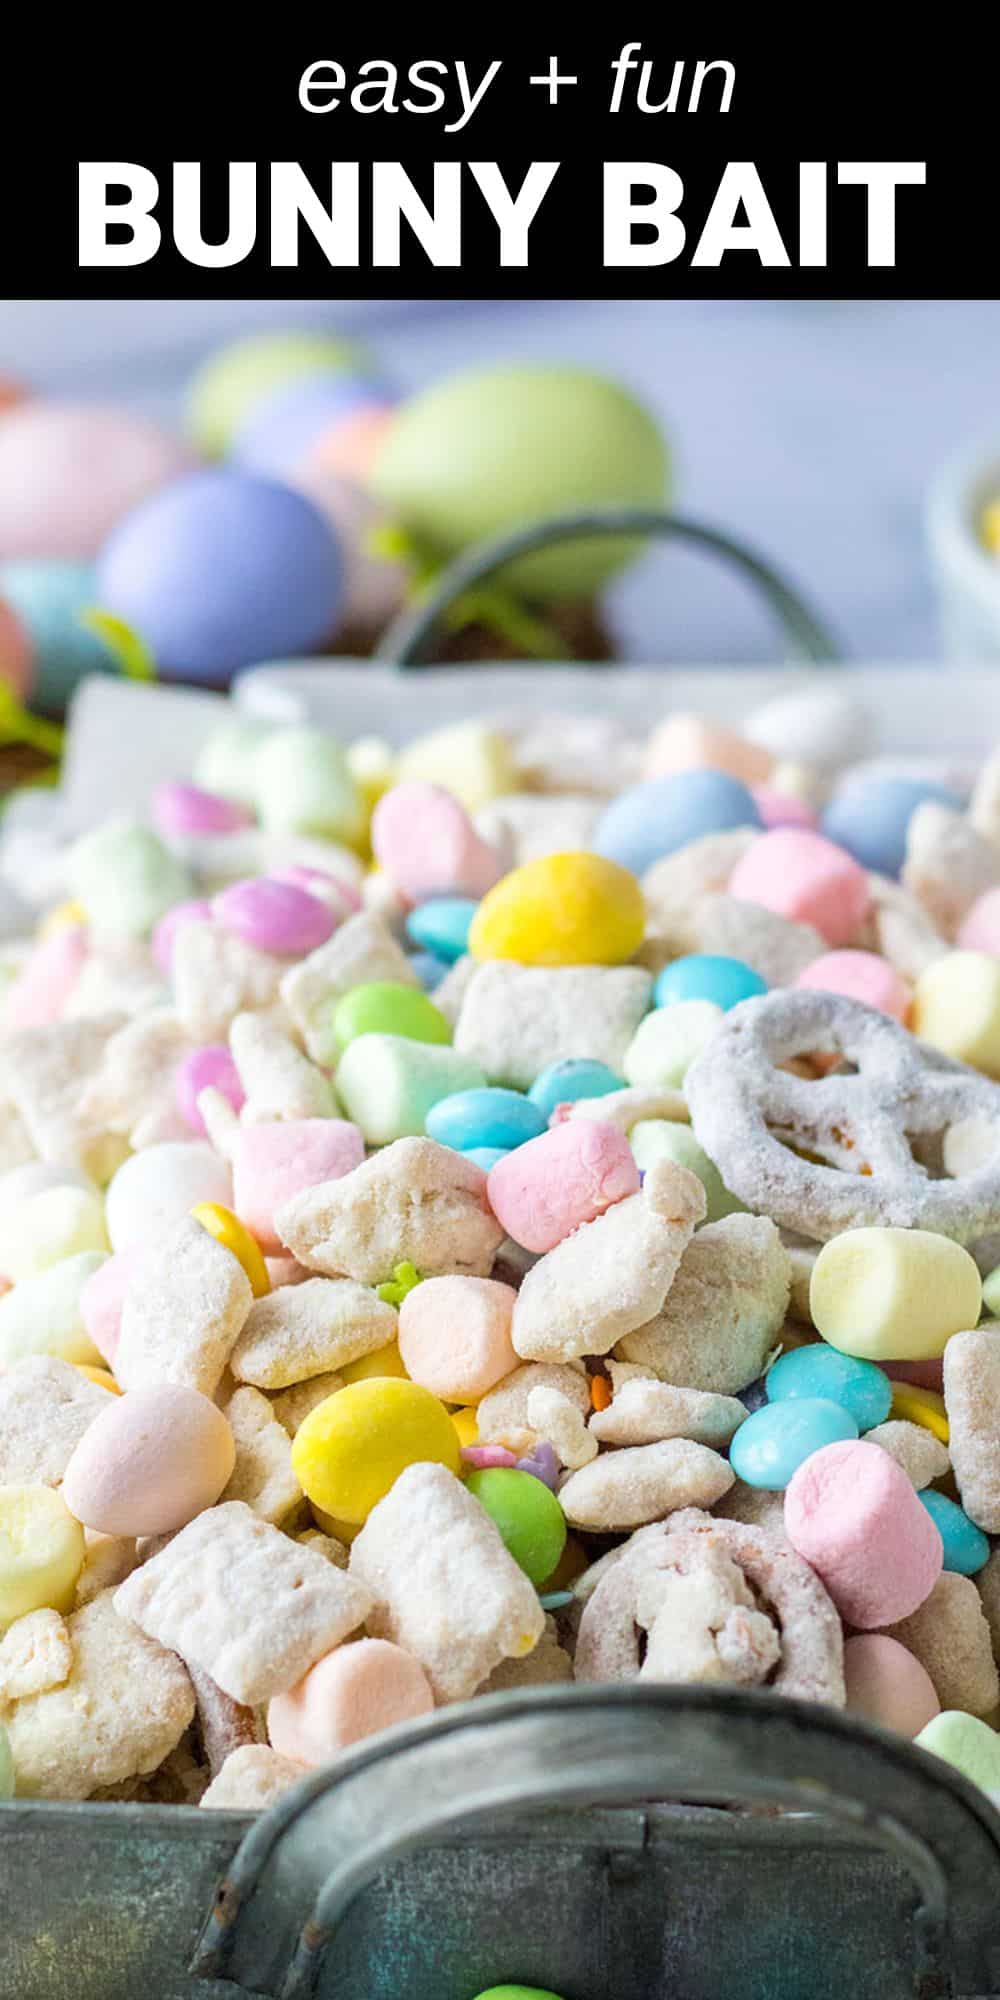 This Bunny Munch is so delicious and such a cute treat for Easter! Funfetti cake mix coats this Bunny Munch that is full of treats like M&Ms and chocolate eggs.